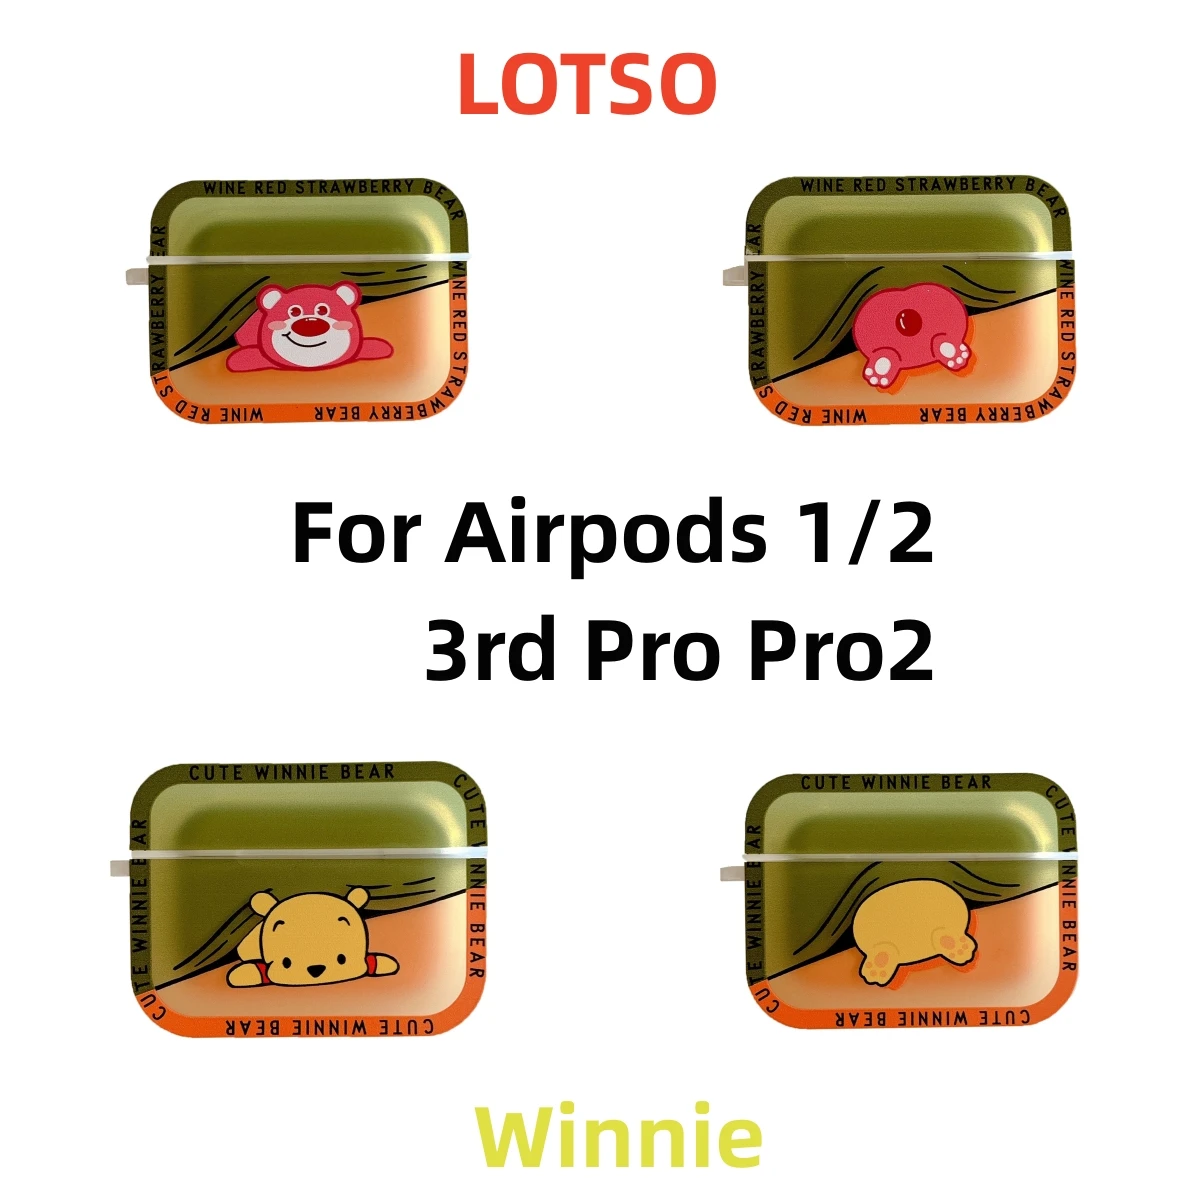 

Disney Winnie the Pooh Lotso Bear Silicone Cases For Airpods 1 2 Pro 2 3rd Protective Bluetooth Wireless Earphone Charging Cover